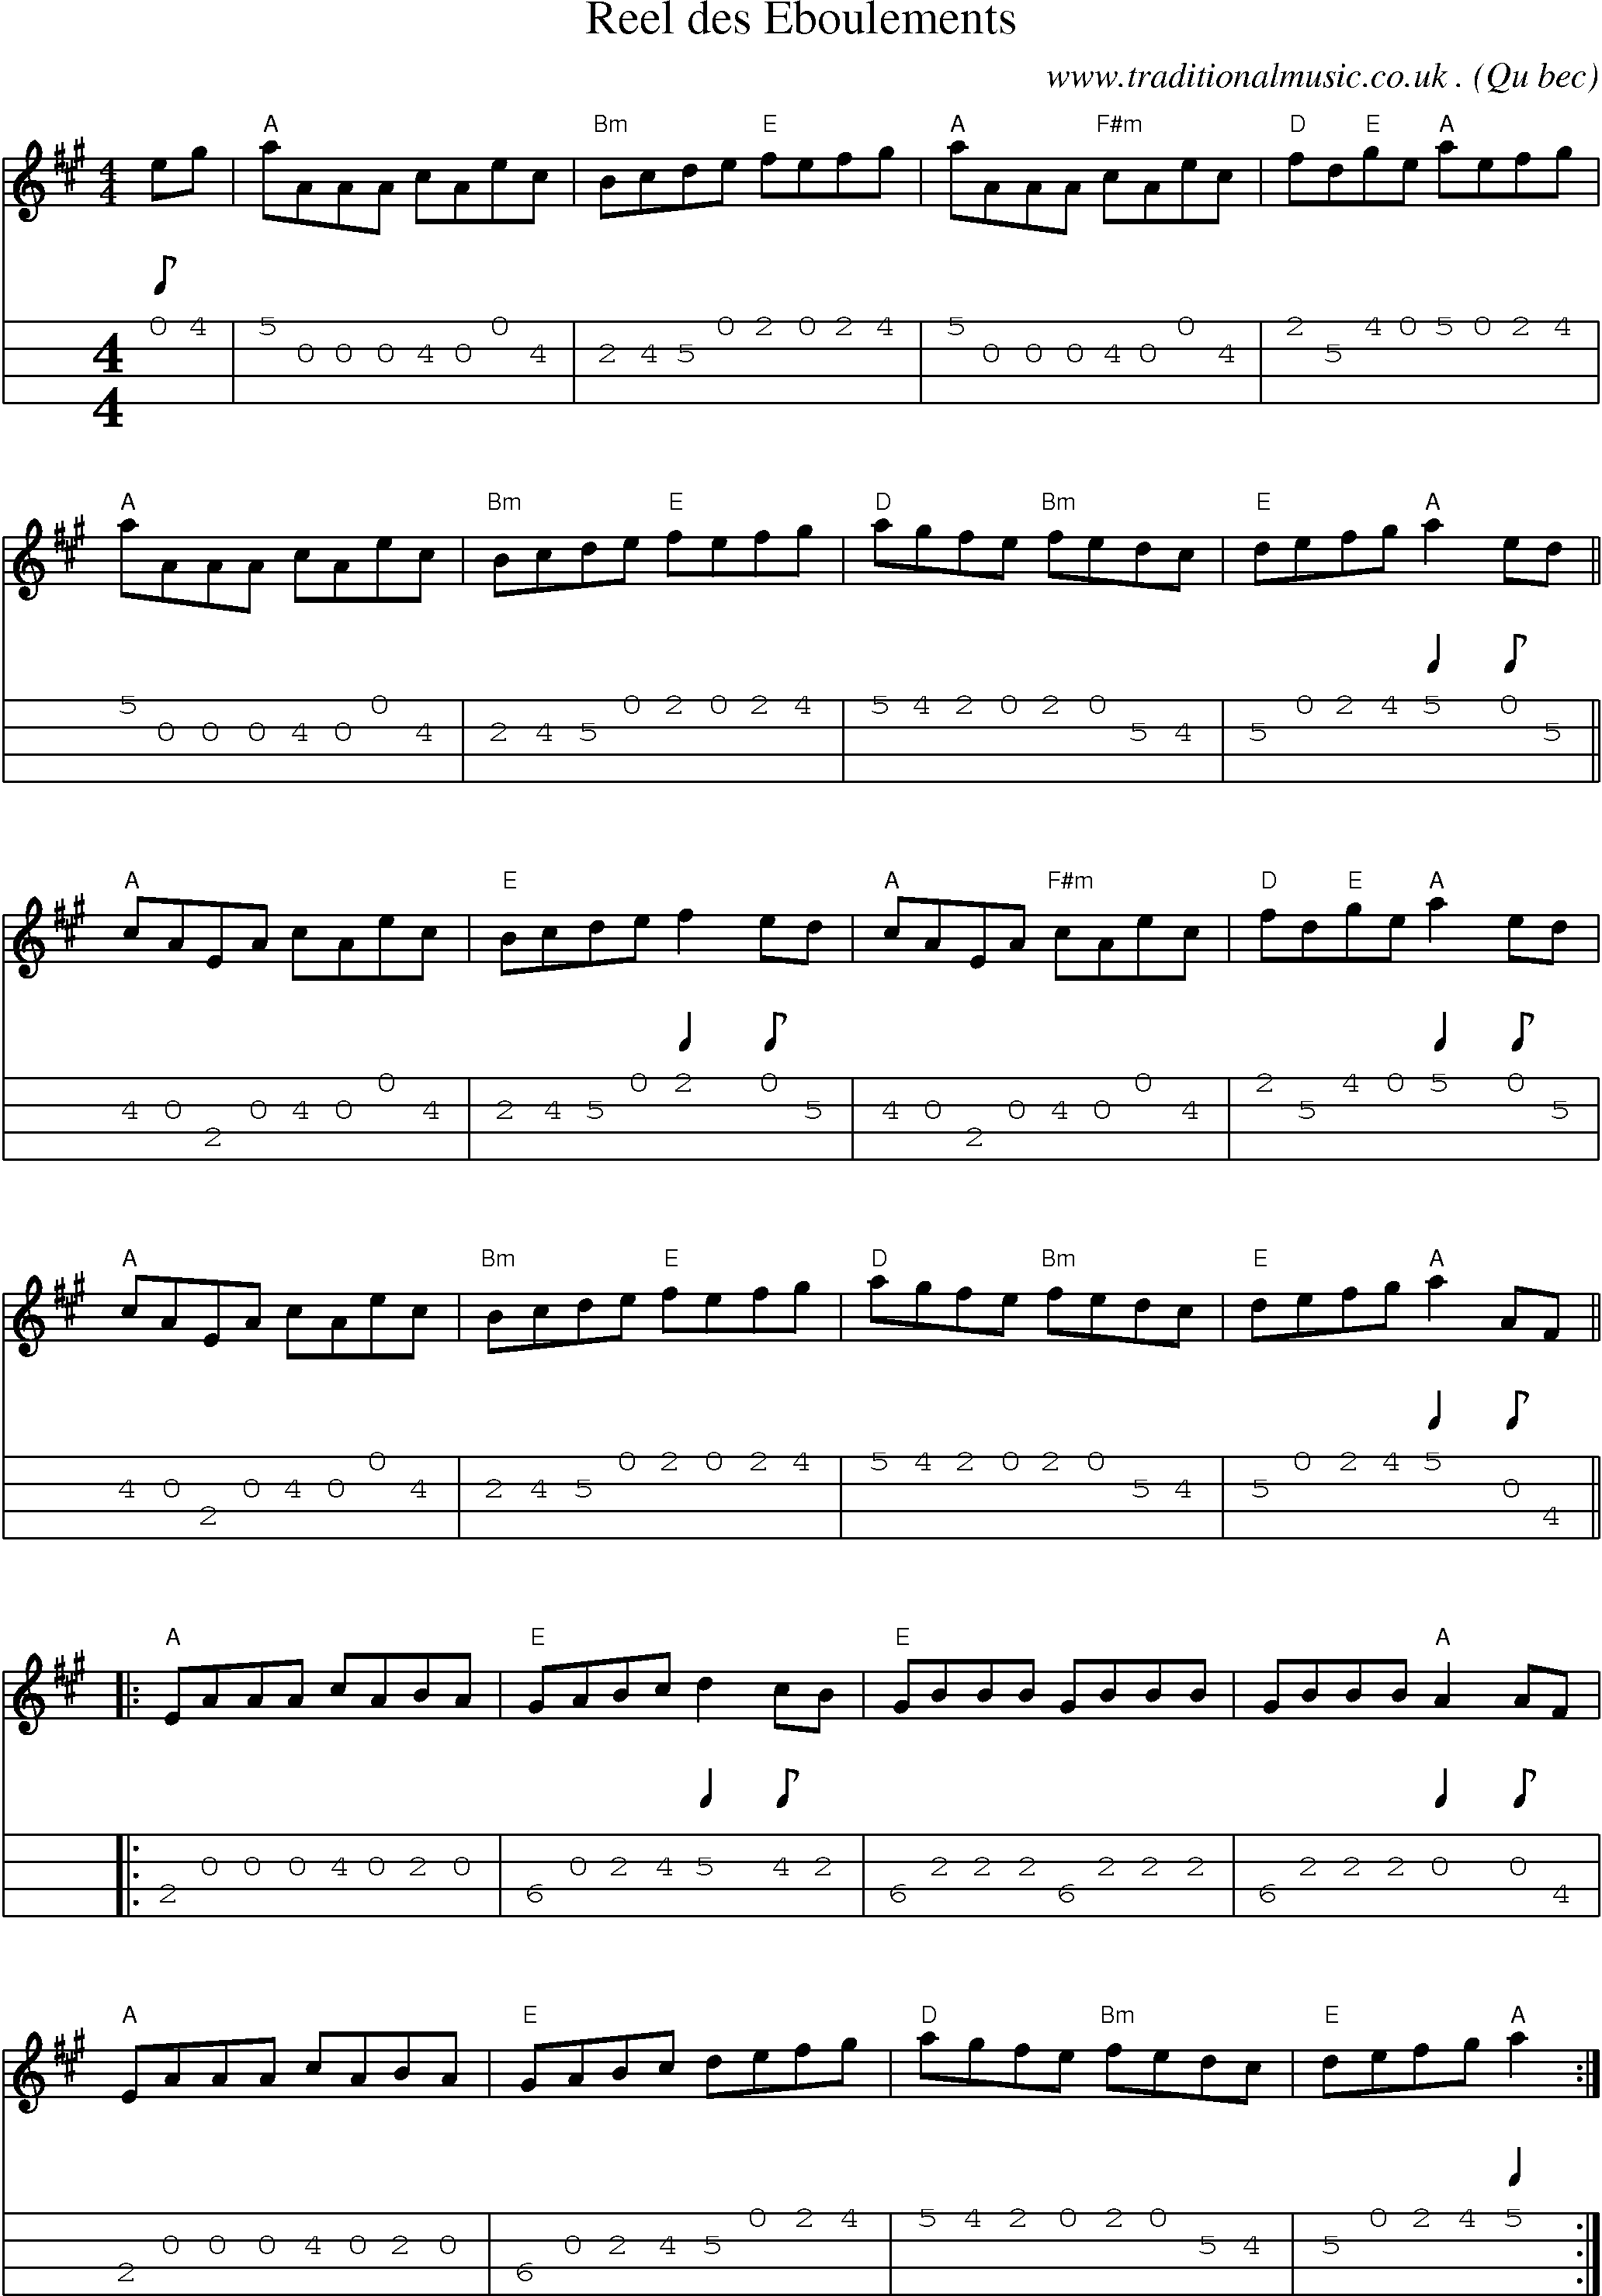 Music Score and Guitar Tabs for Reel Des Eboulements